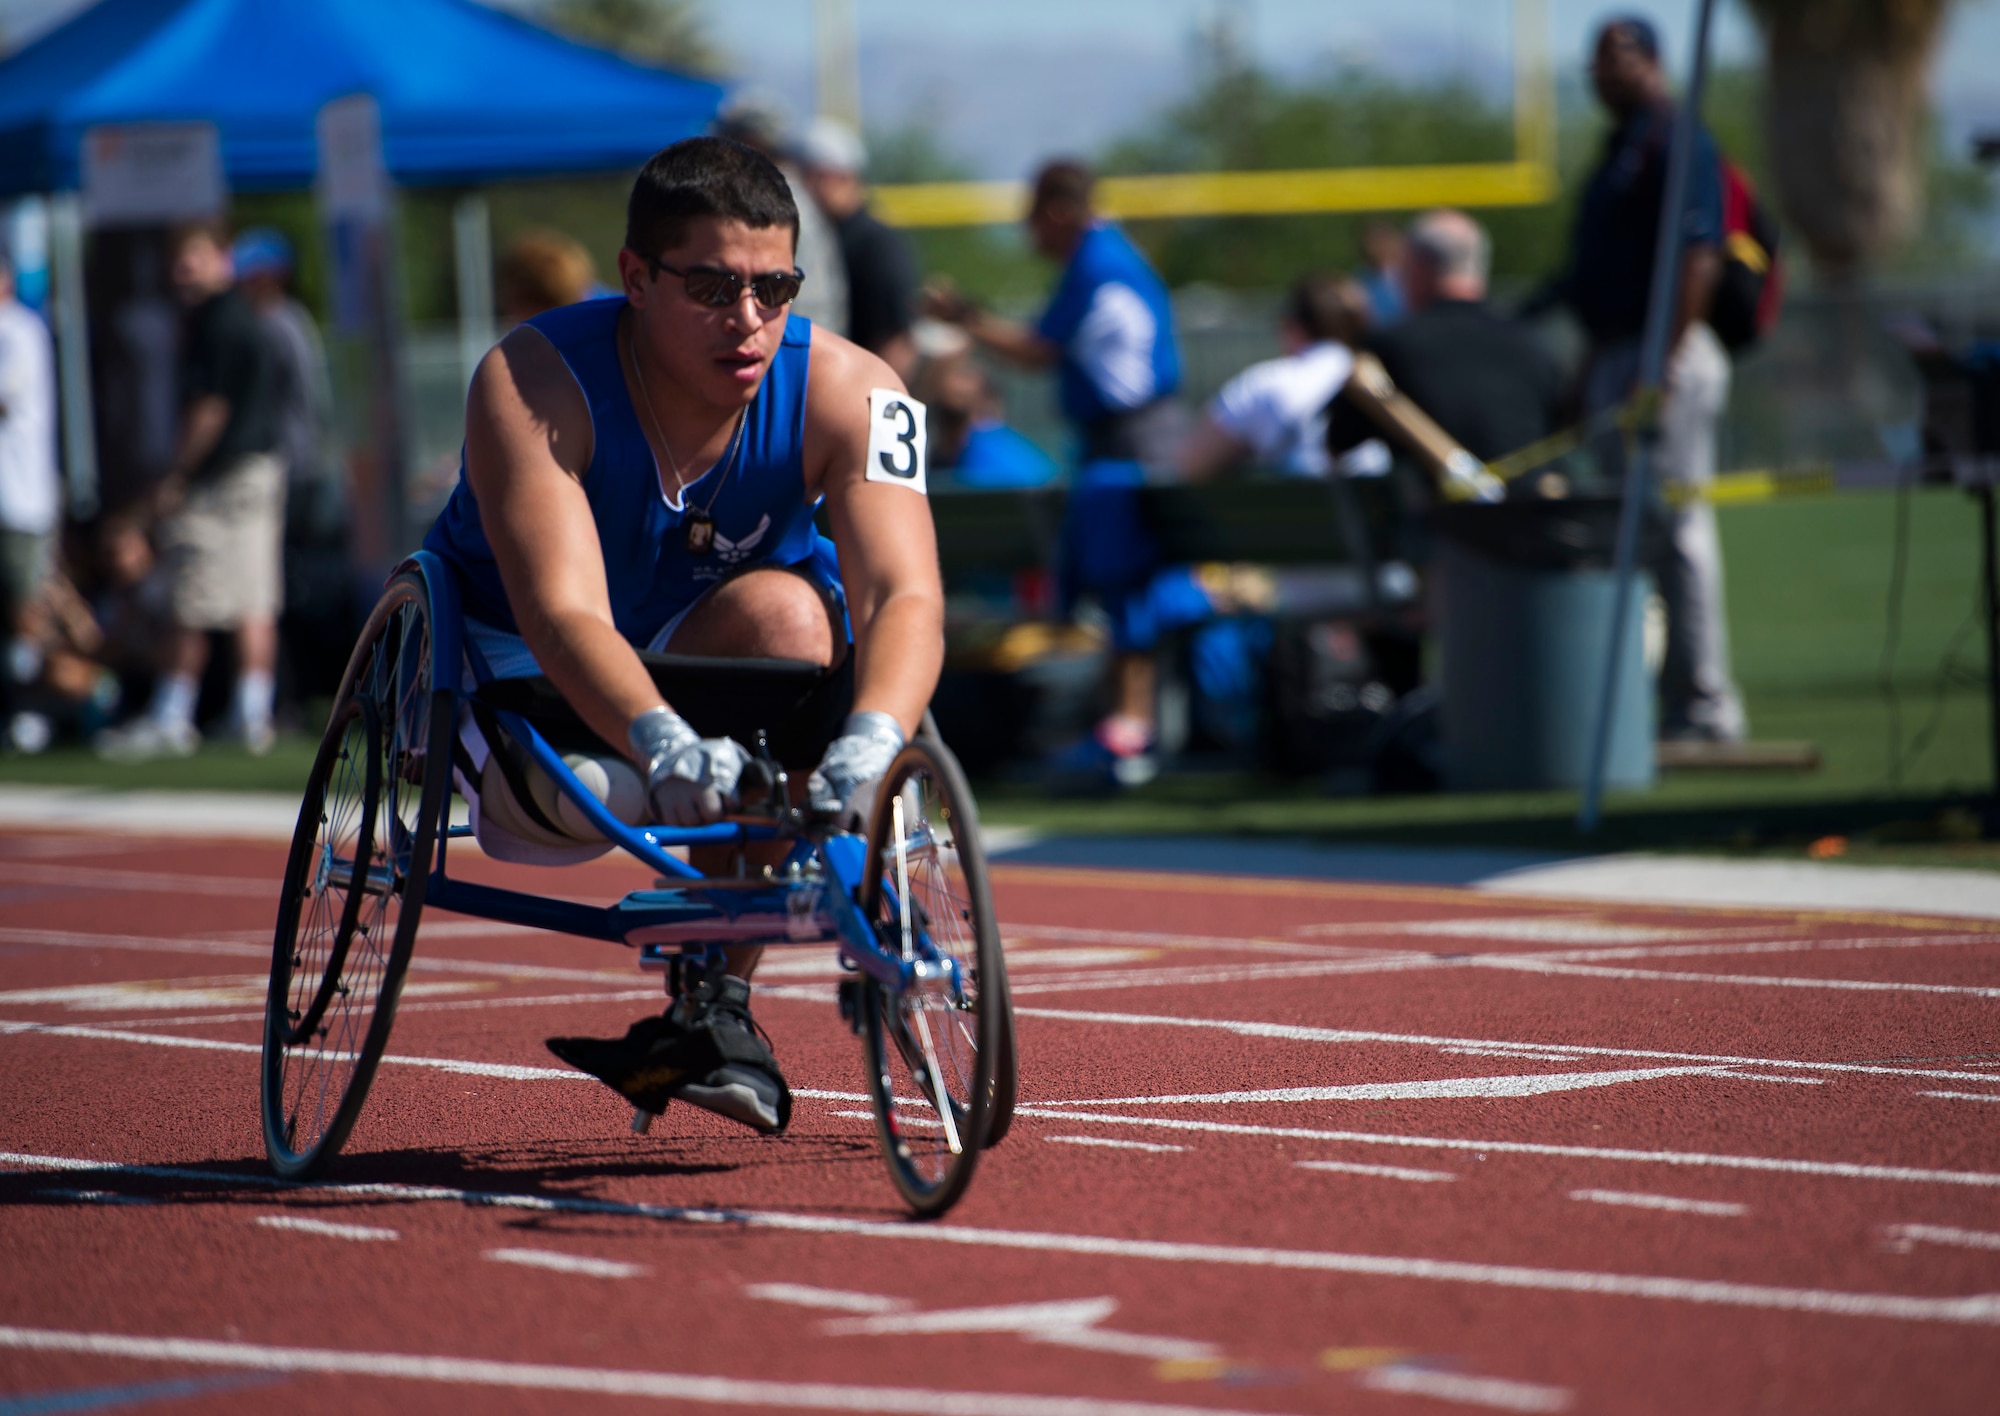 Staff sgt. Mark Johnson raced in a sprinting wheelchair during the track and field portion of the Air Force Trials April 8, 2014, at Rancho High School in Las Vegas, Nev. The Air Force Trials give injured, ill and wounded Airmen a chance to compete in Paralympic-style events.  (U.S. Air Force photo/Senior Airman Jette Carr)